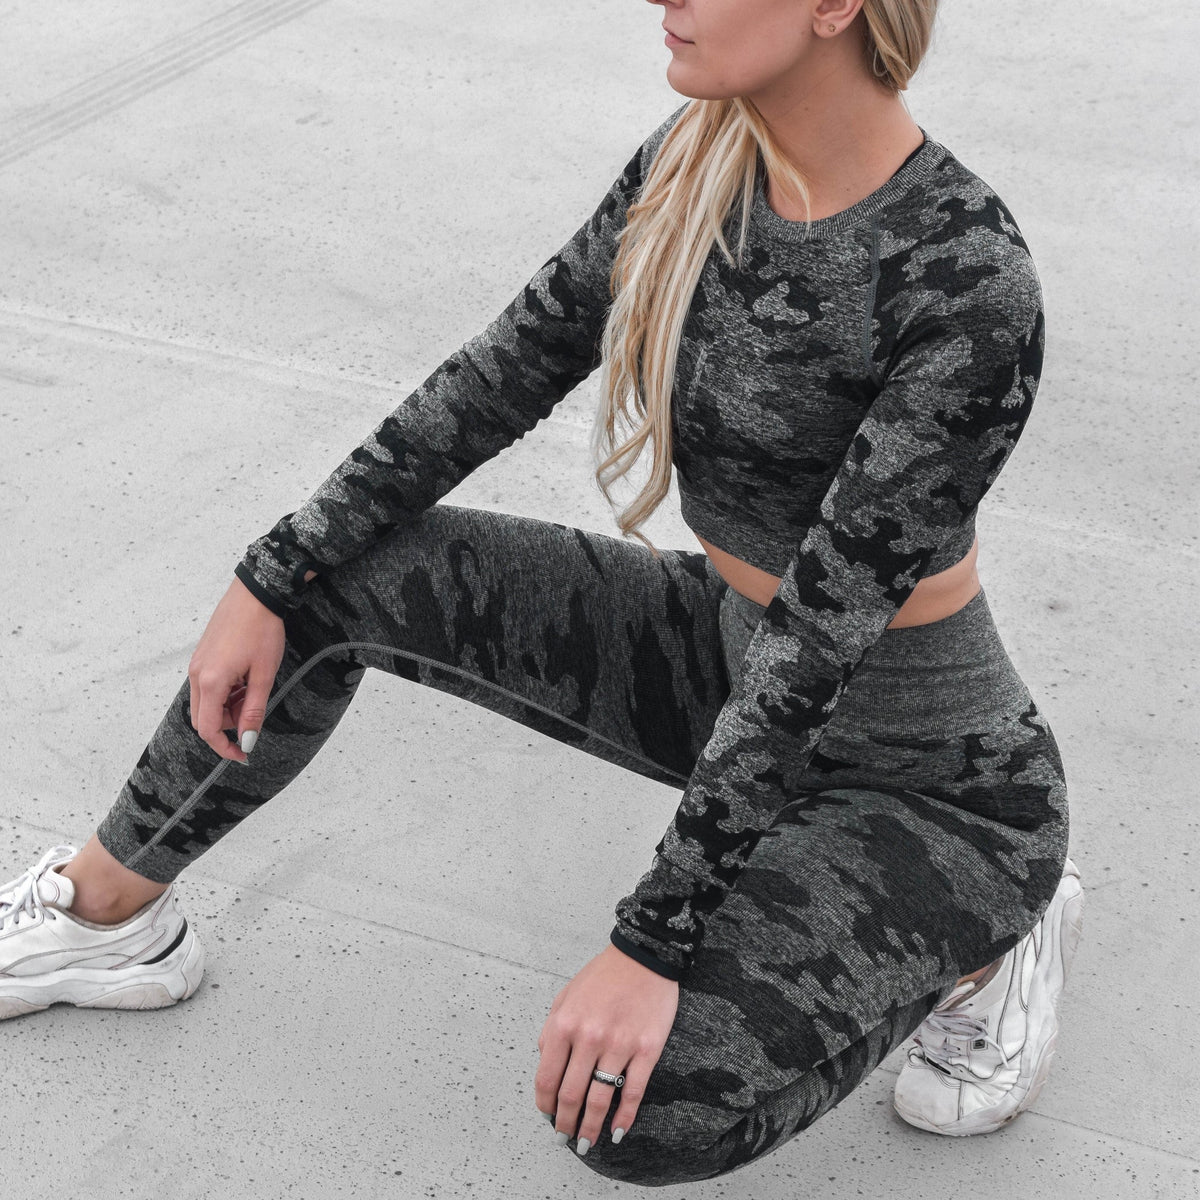 Classic Camo Long Sleeve Set (Leggings + Top) by Stylish AF Fitness Co